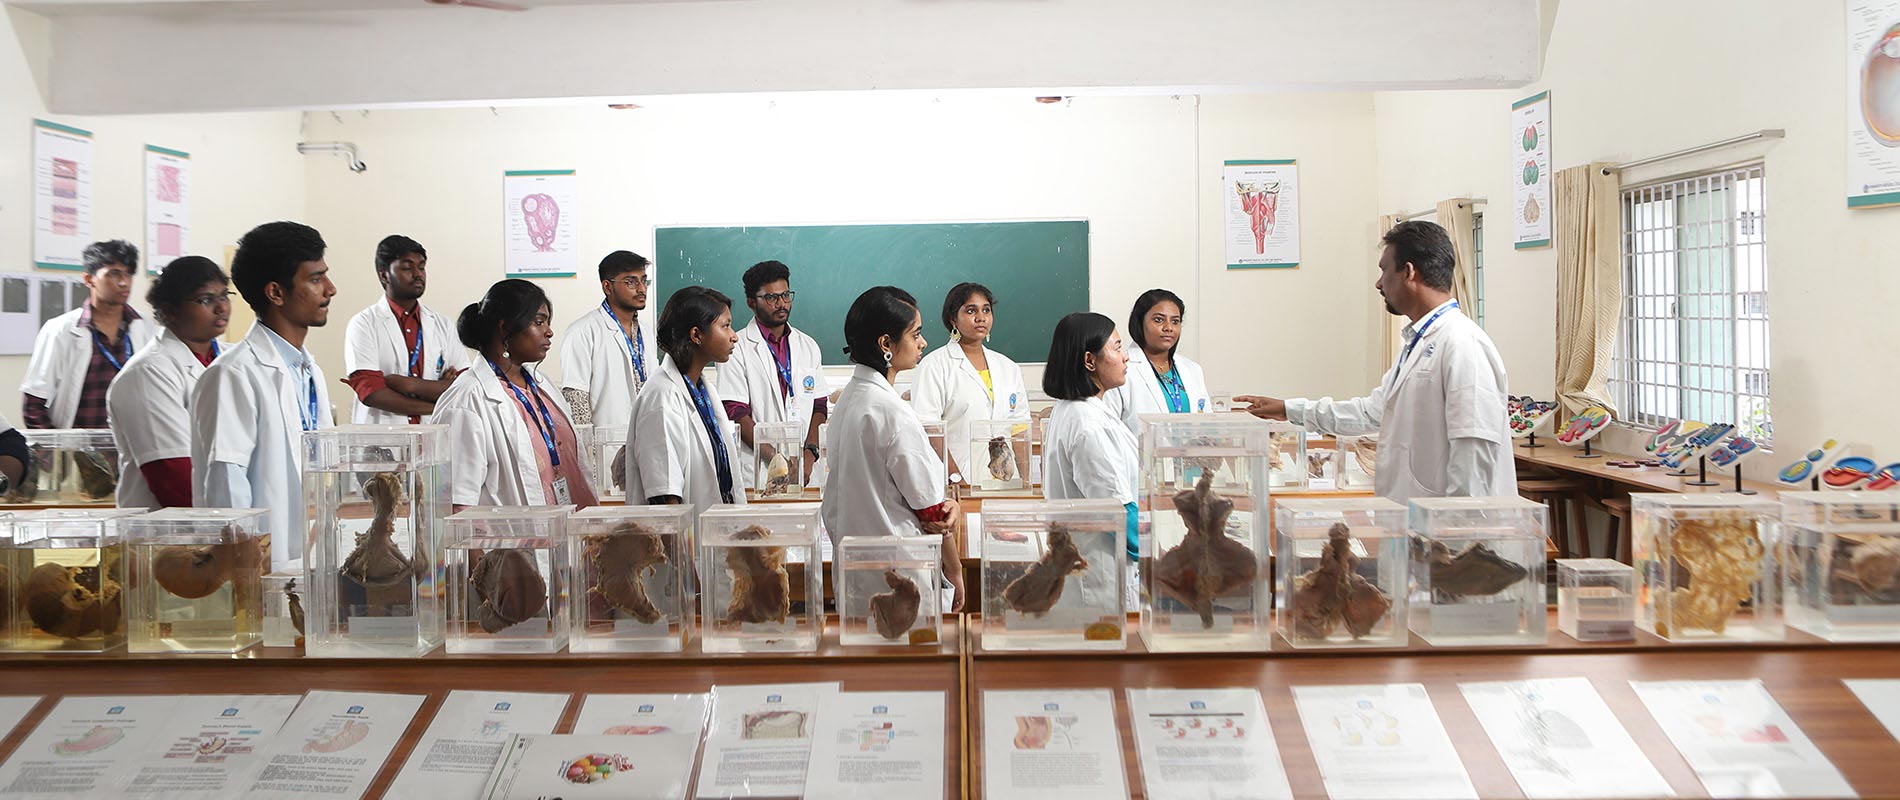 Bhaarath Medical College and Hospital